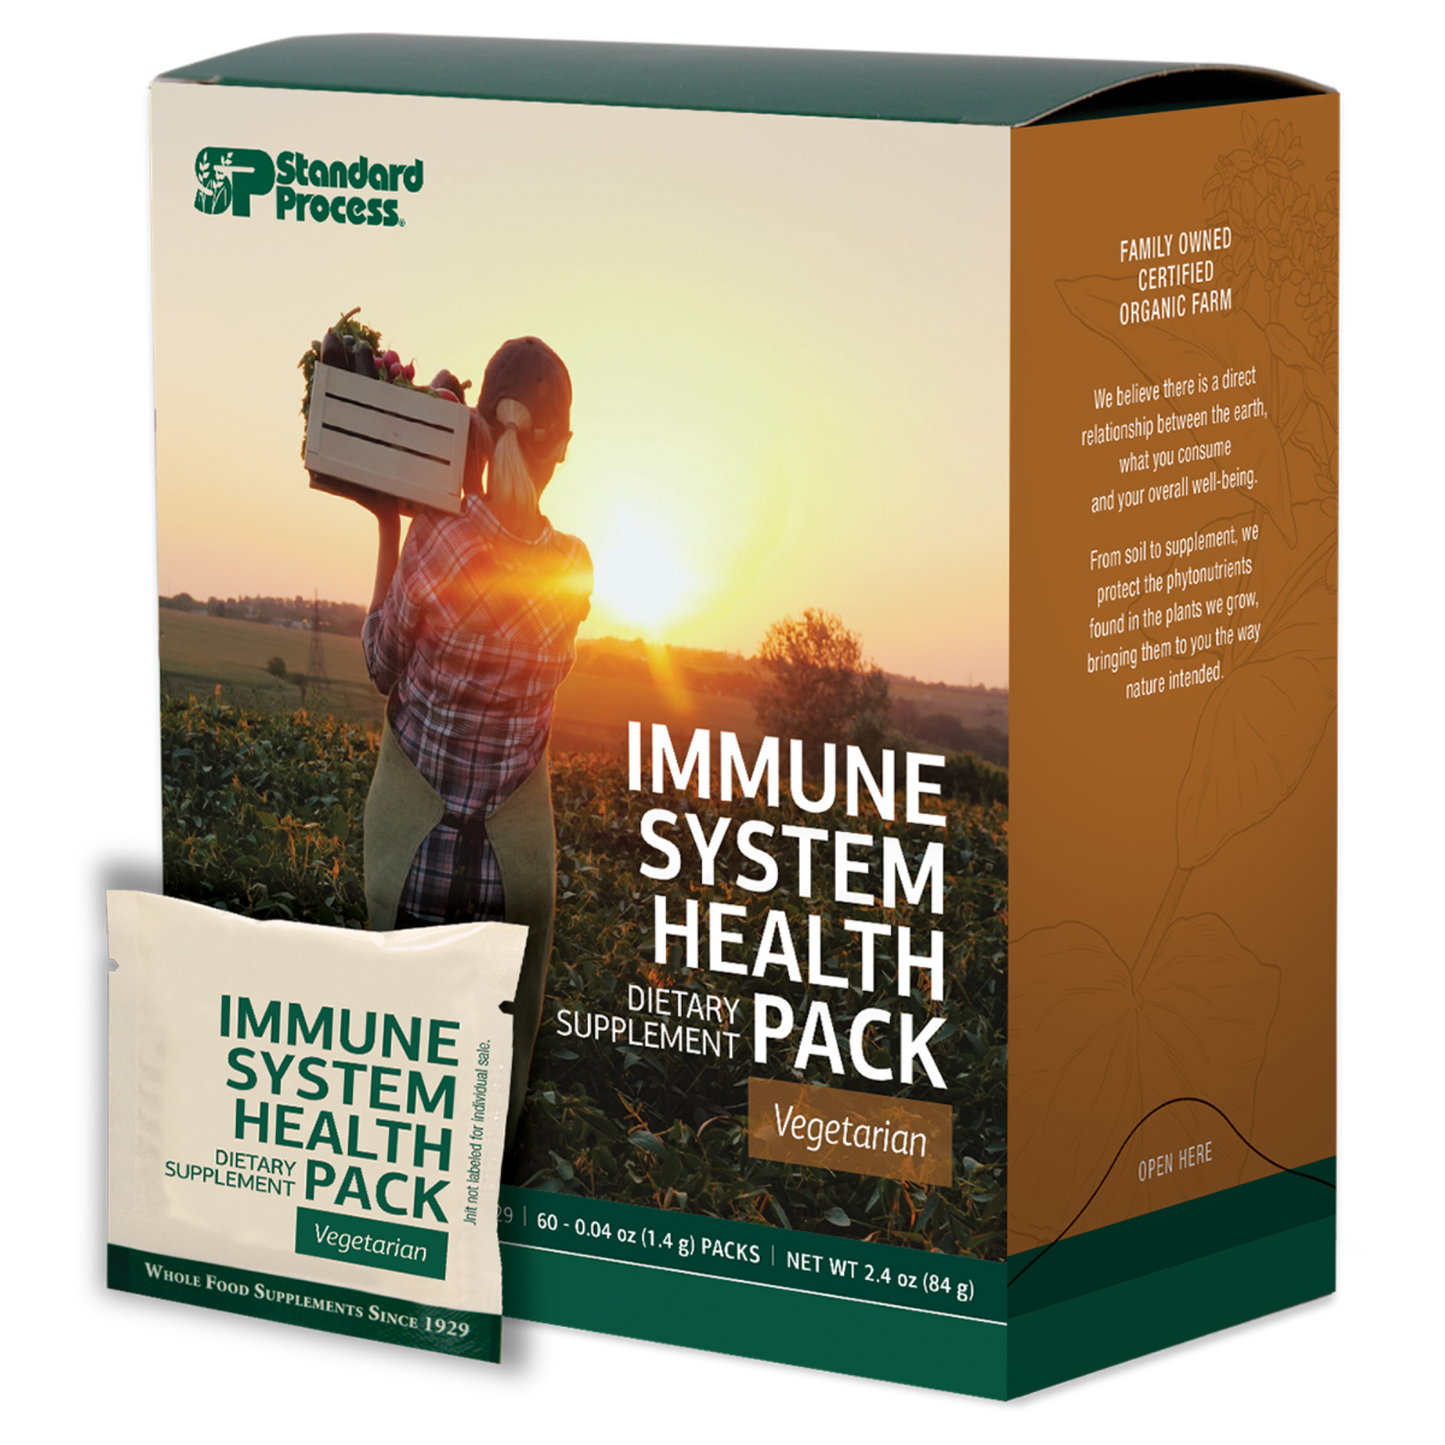 Primary image of Immune System Health Pack